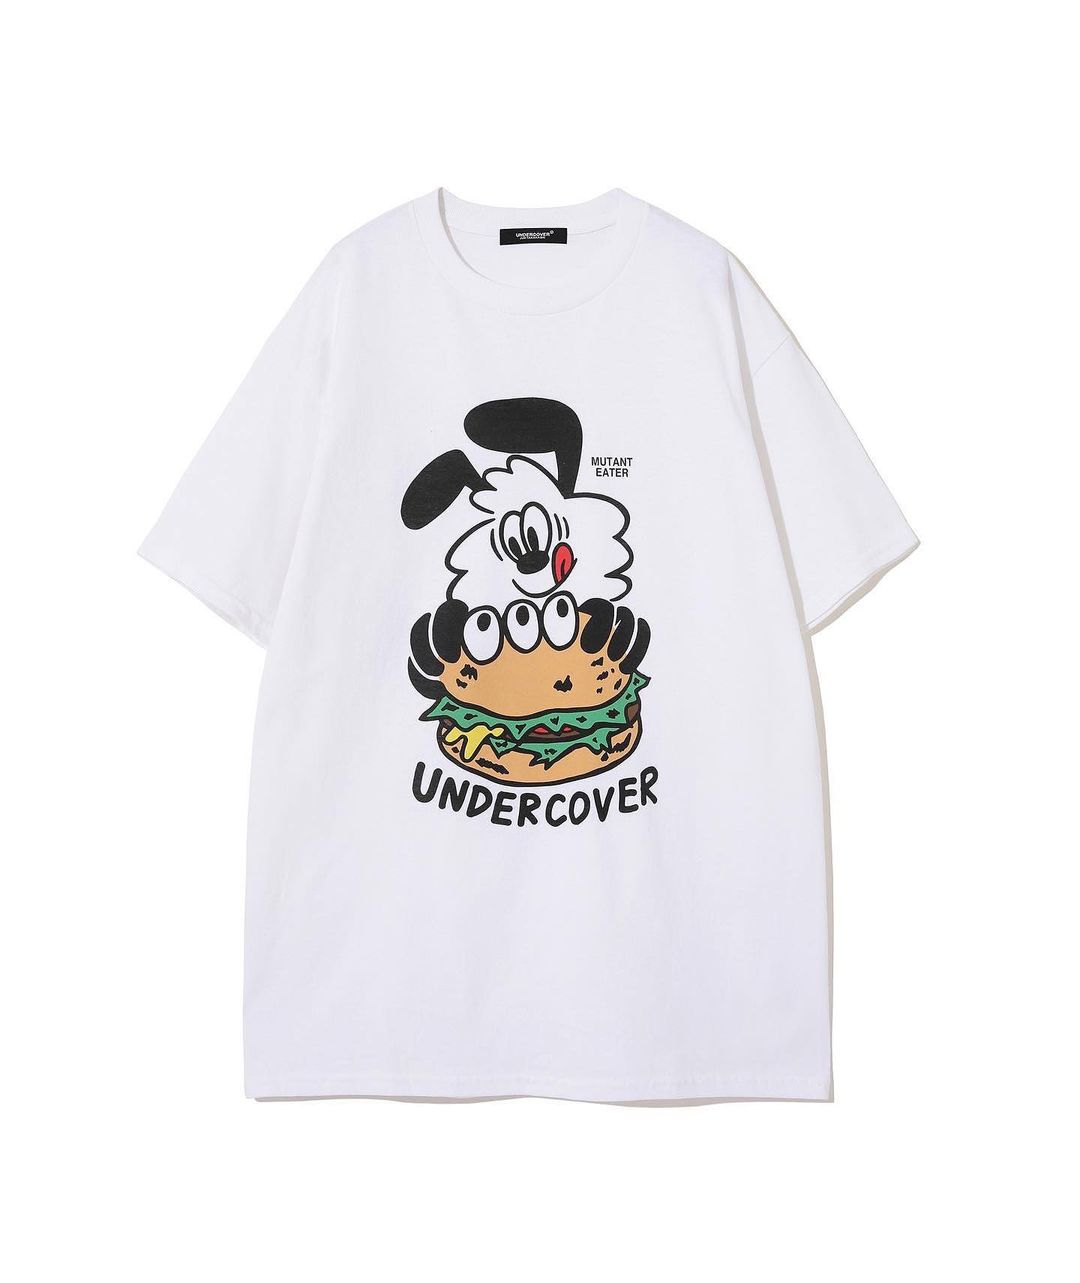 UNDERCOVER x Girls Don't Cry コラボアイテムがCOMPLEXCON 2022にて 